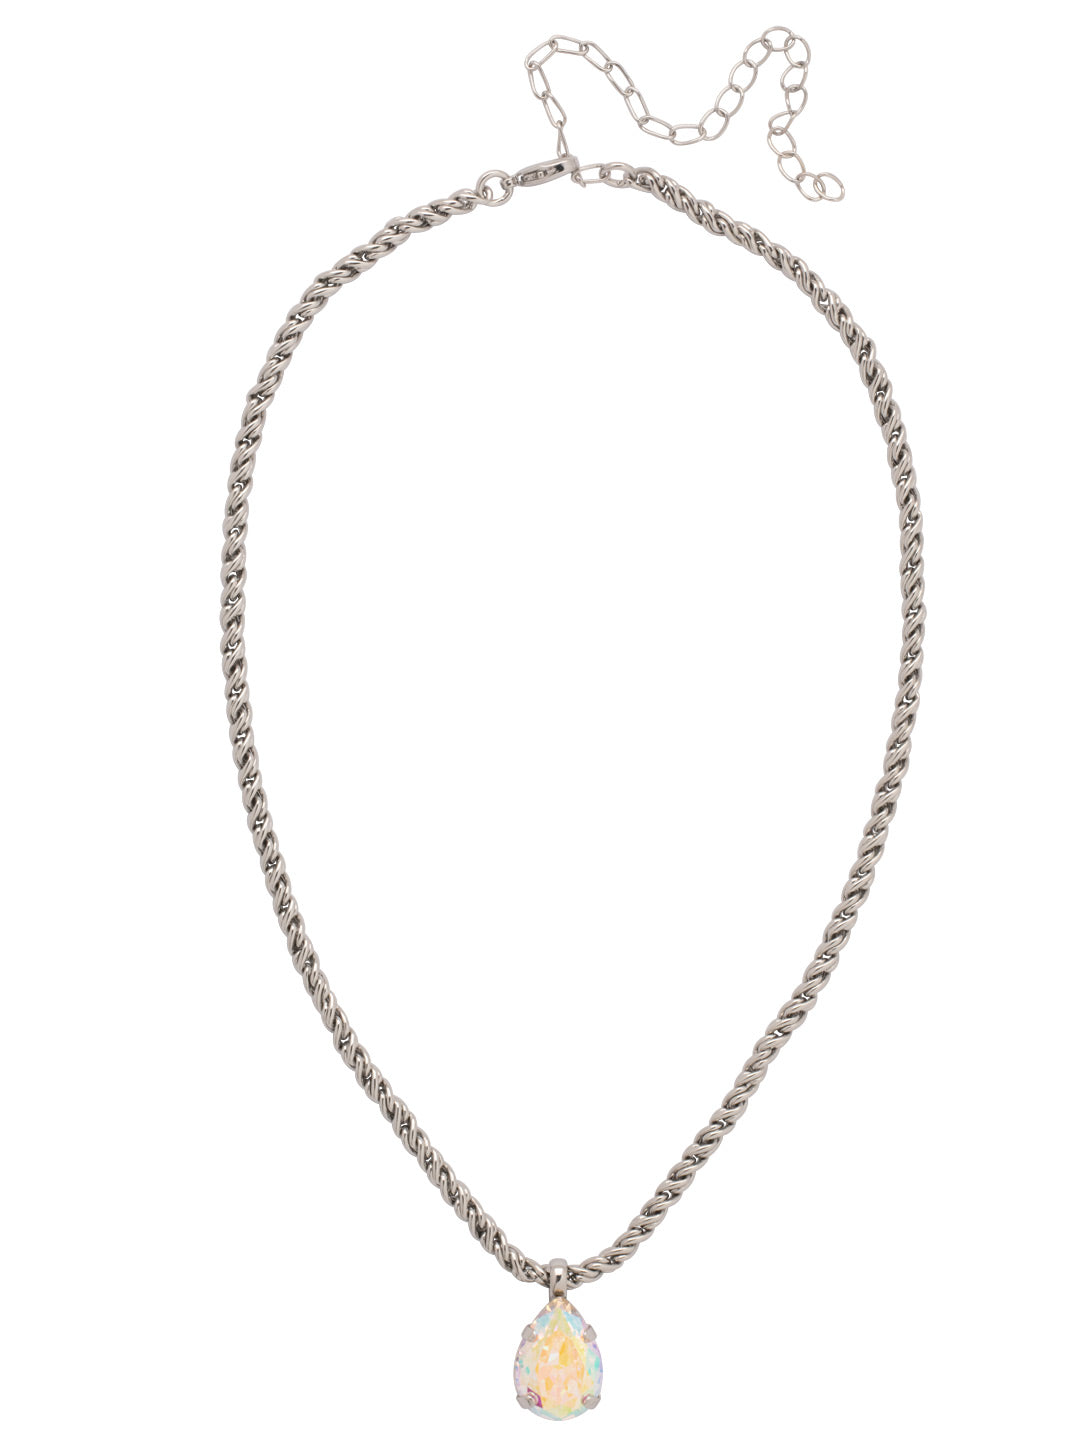 Eileen Pendant Necklace - NFF10PDCAB - <p>The Eileen Pendant Necklace features a single pear cut candy gem on an adjustable rope chain, secured by a lobster claw clasp. From Sorrelli's Crystal Aurora Borealis collection in our Palladium finish.</p>